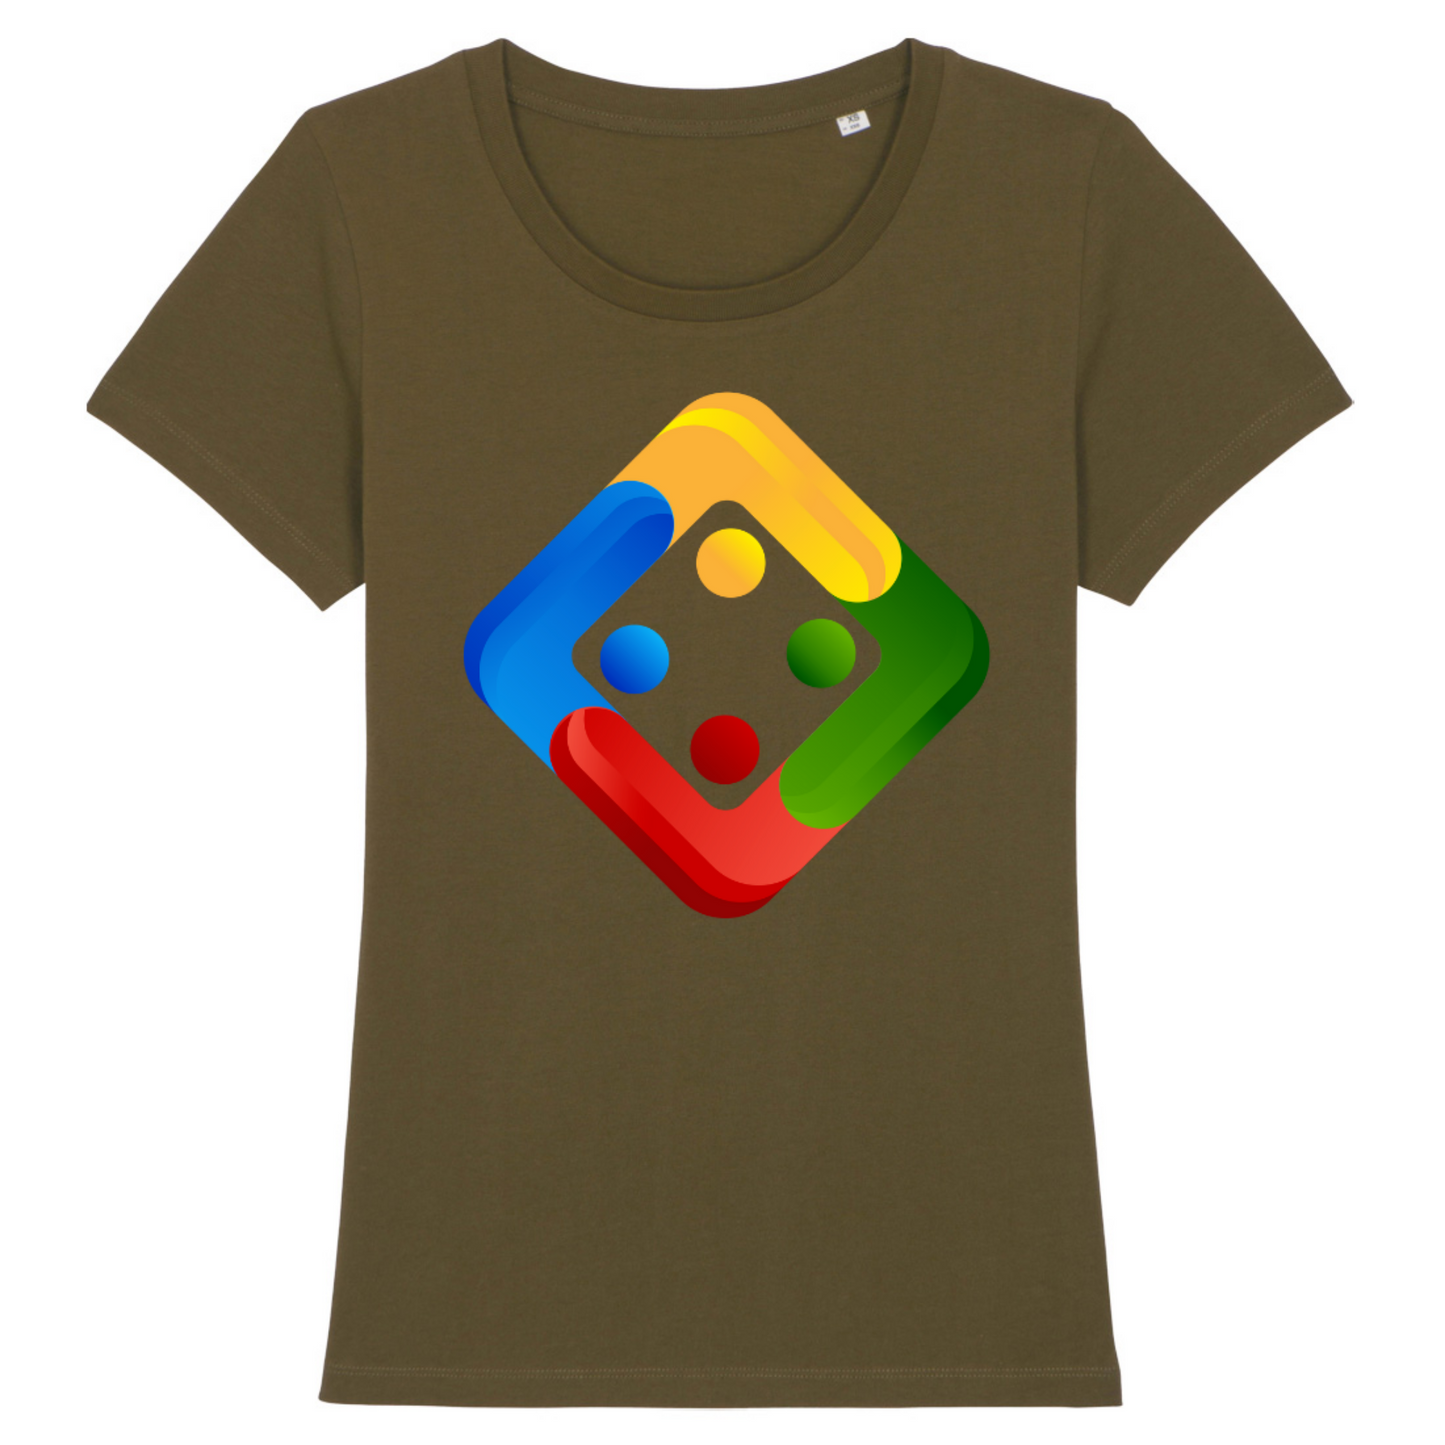 Women's Organic T-shirt in dark colours with large Uckers emblem.  Available in 11 colours.